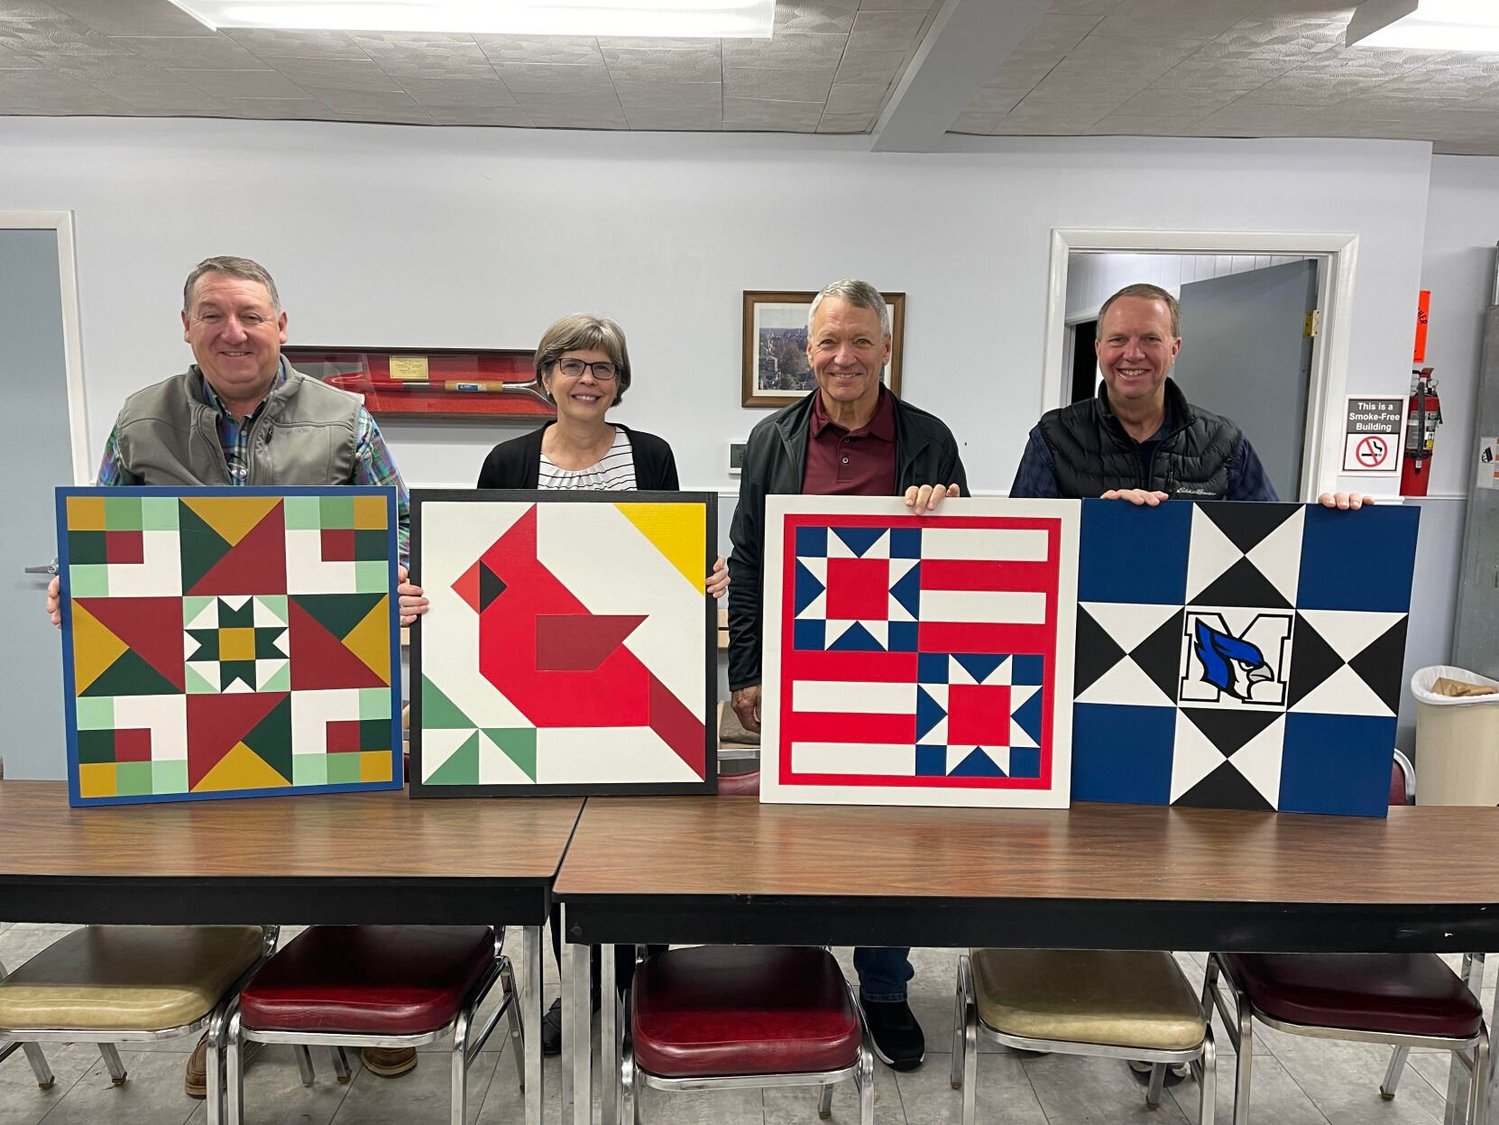 (Left to right) Kyle Whittaker, Janet Wutke, Mike Wutke and Alan Thomas show off their barn quilts. Janet, who started making barn quilts for her church, decided that she wanted to donate them to the Grow Education Marshfield fundraising efforts. The first 50 people who donate $200 to the fund will receive a barn quilt as a thank you gift. “I started teaching the barn quilt classes because there were some ladies that said ‘I wanna do this’,” laughed Whittaker. “…we want to engage people in what we do here…ultimately that’s what we are about here-to improve the lives of people that live in this county.”